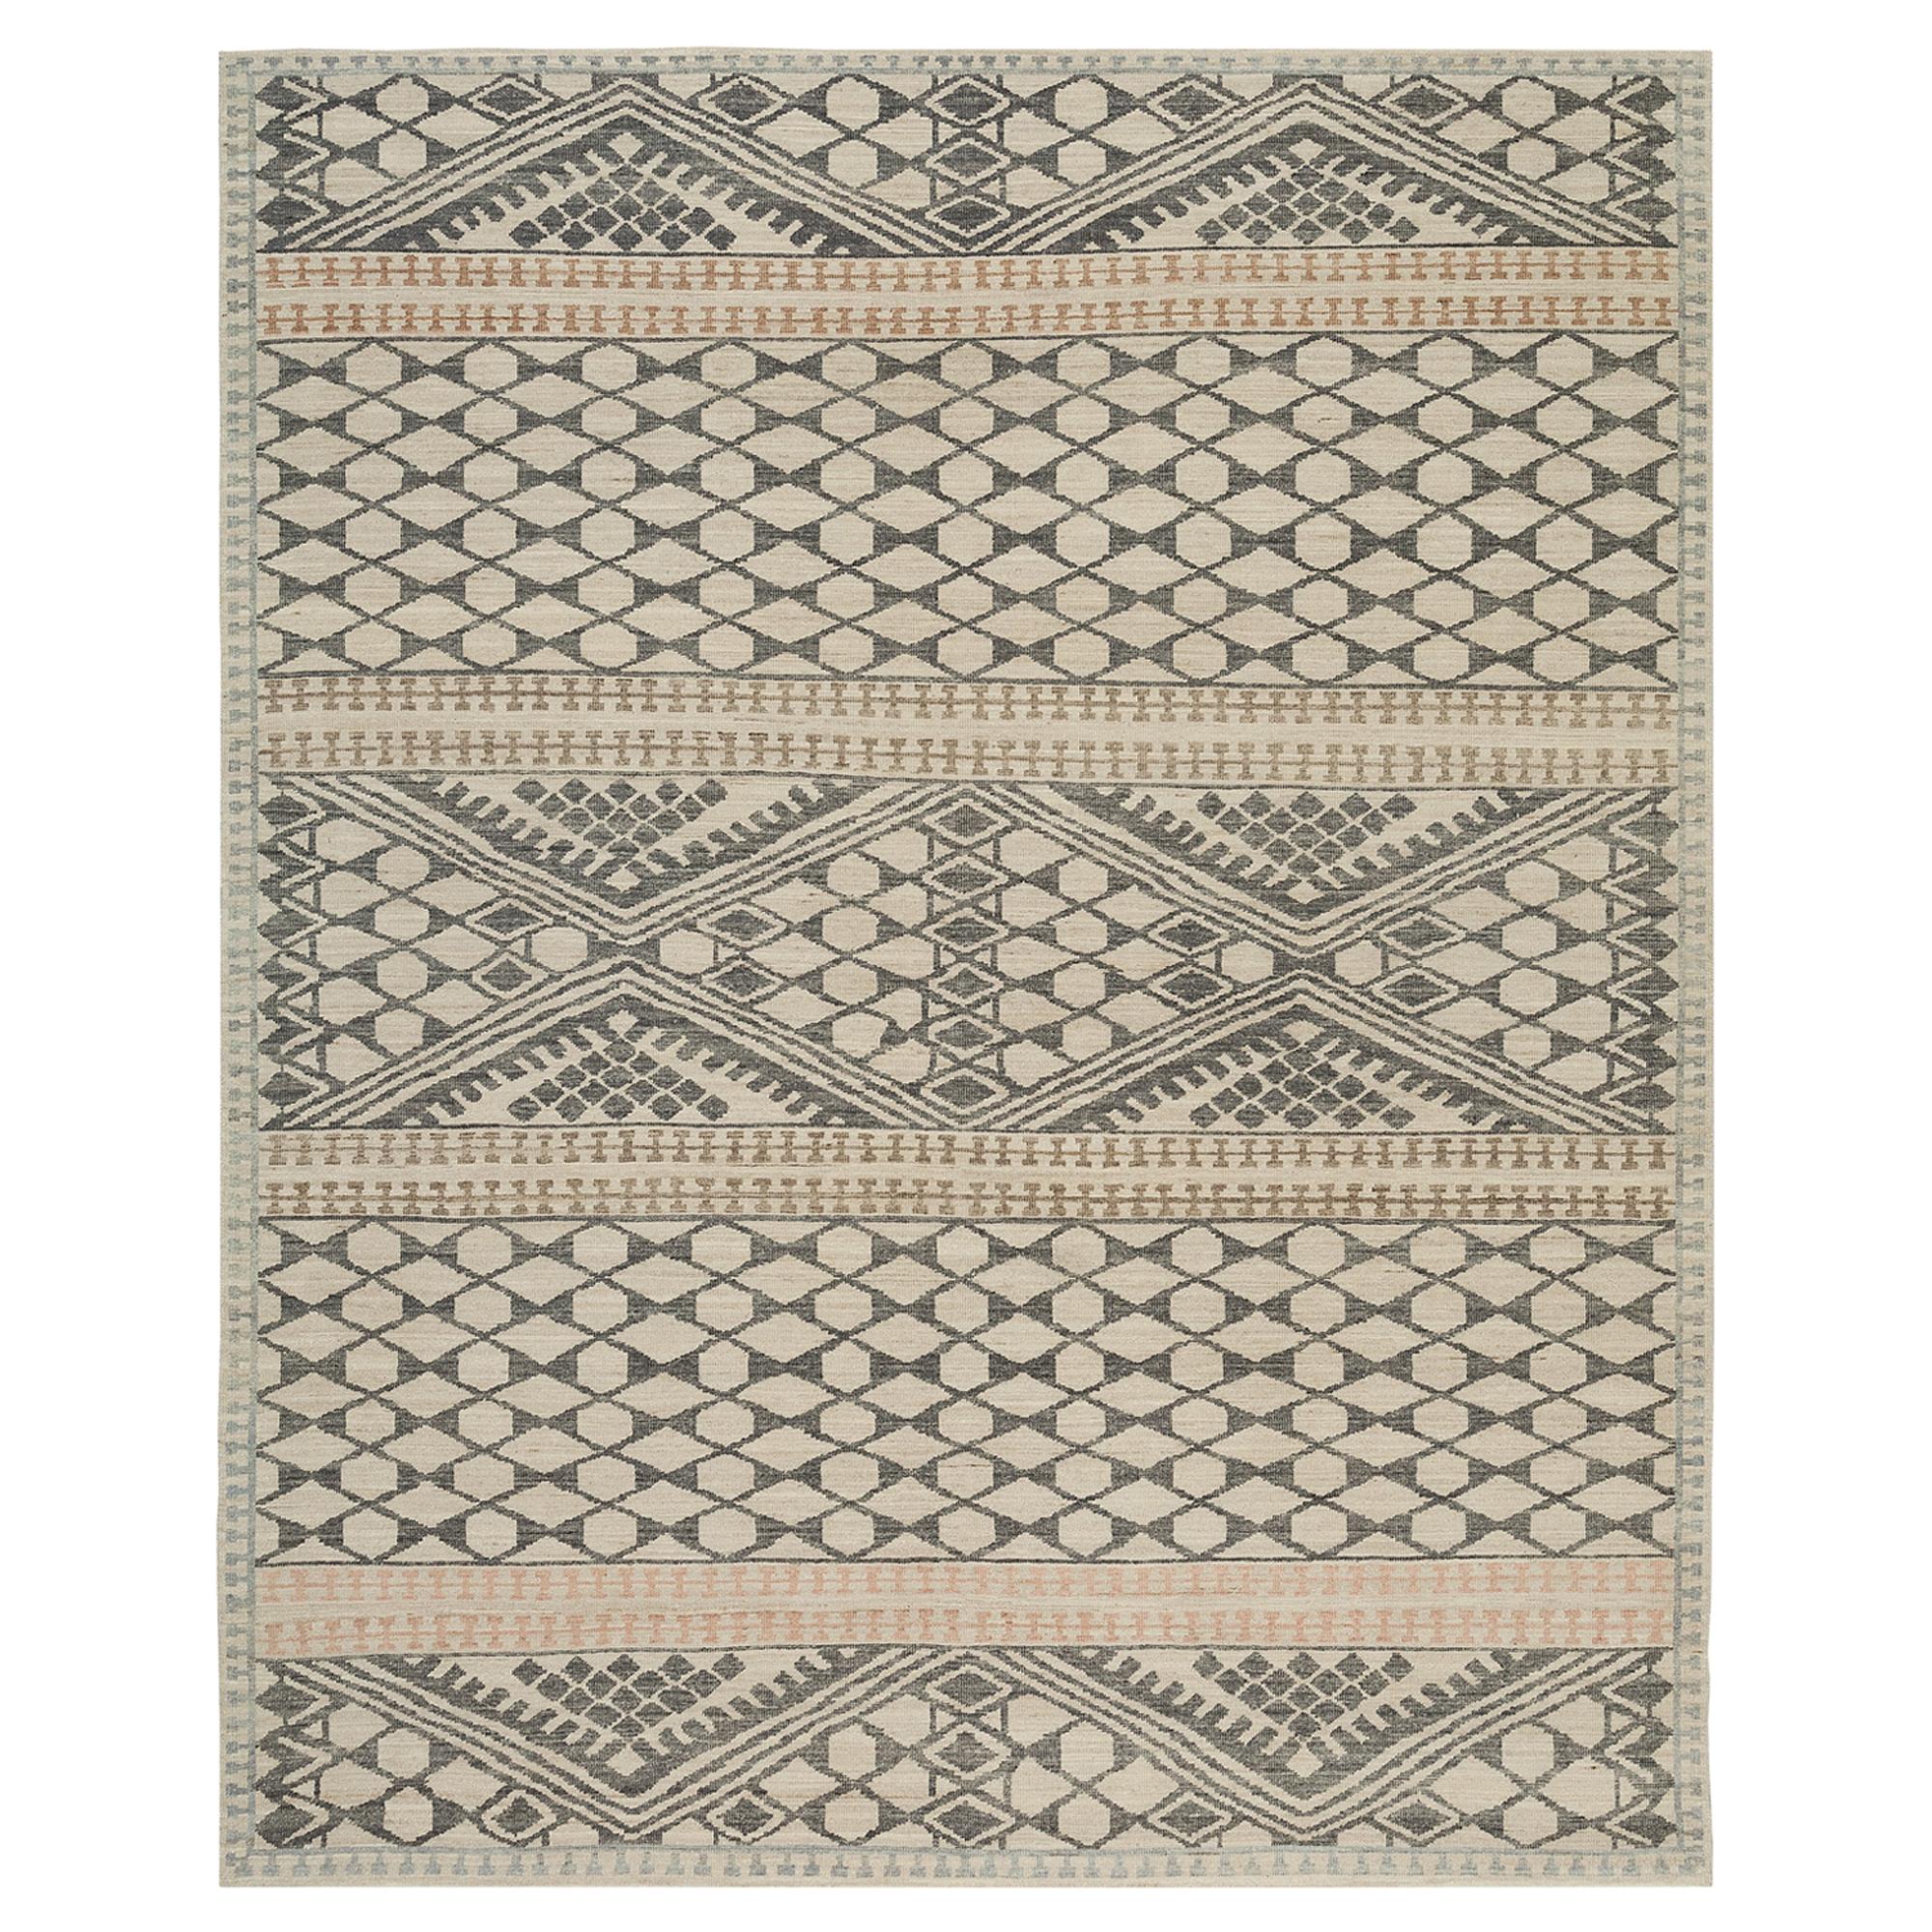 Nazmiyal Collection Beige Geometric Modern Boutique Area Rug 12 ft x 18 ft